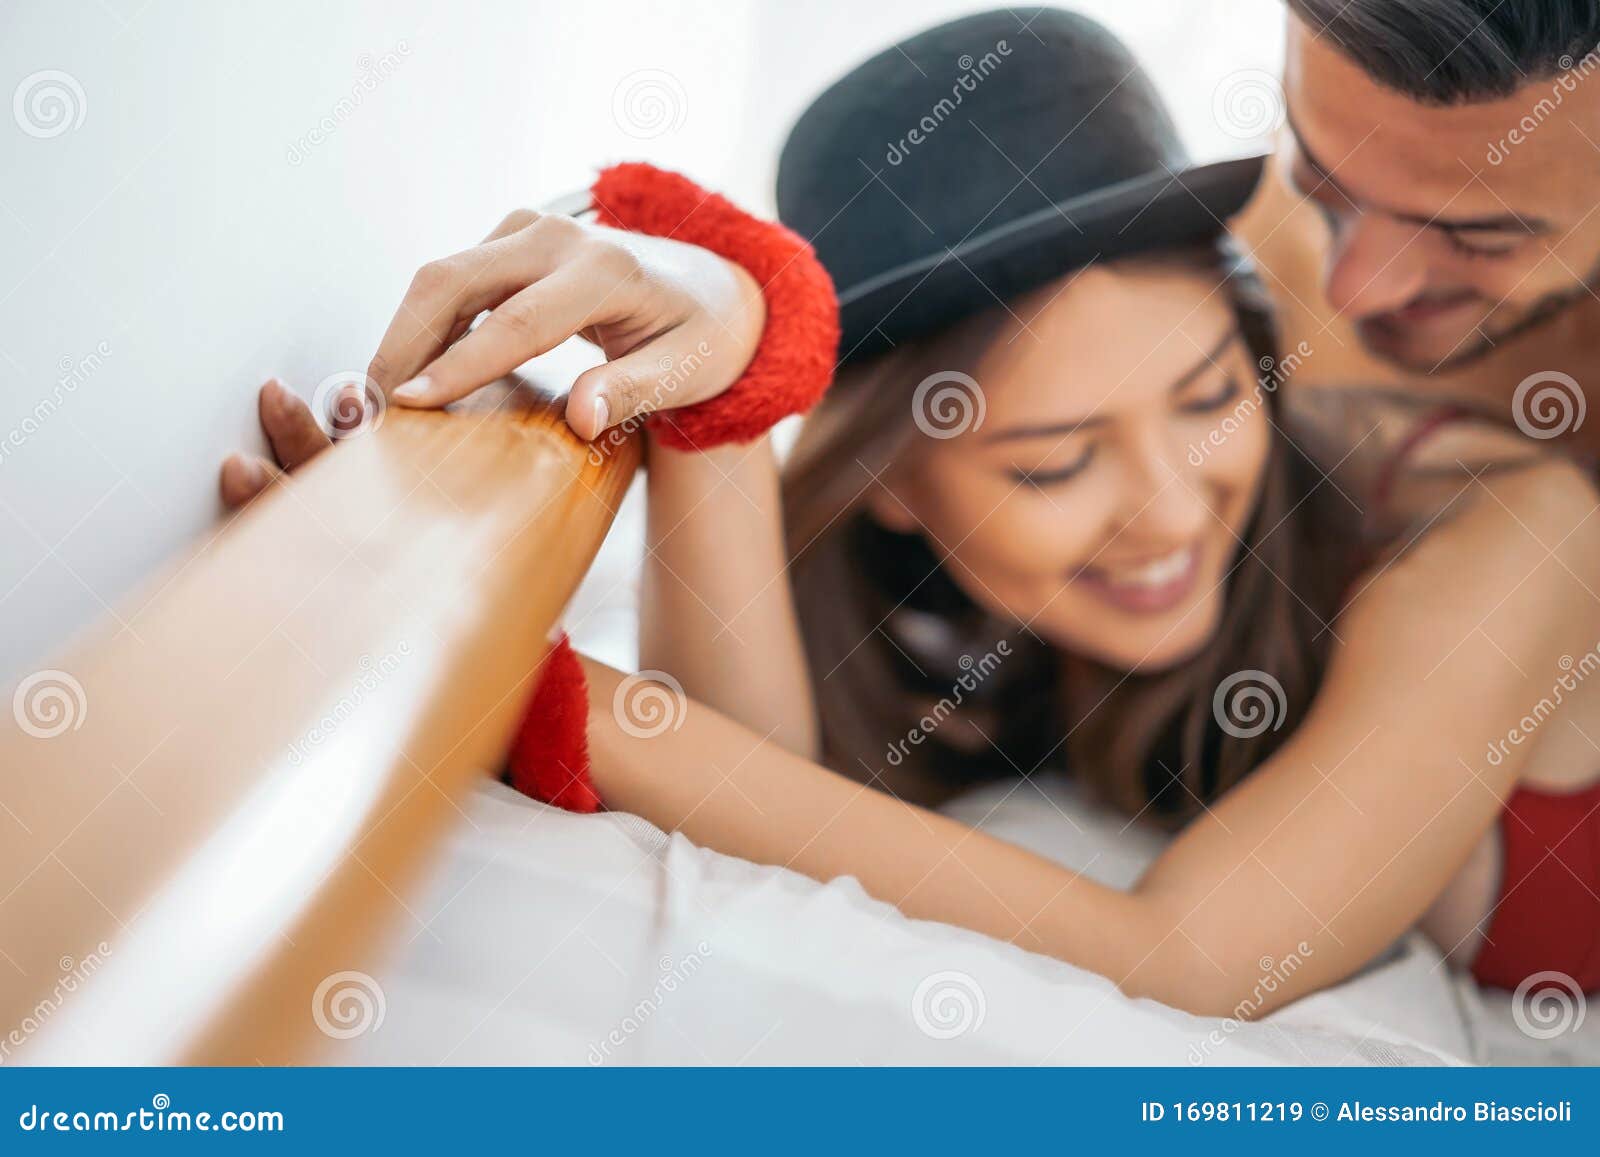 Couple Playing Love Domination Games in the Bed - Temptation Man and Woman Having Erotic Sex in the Bedroom Stock Image